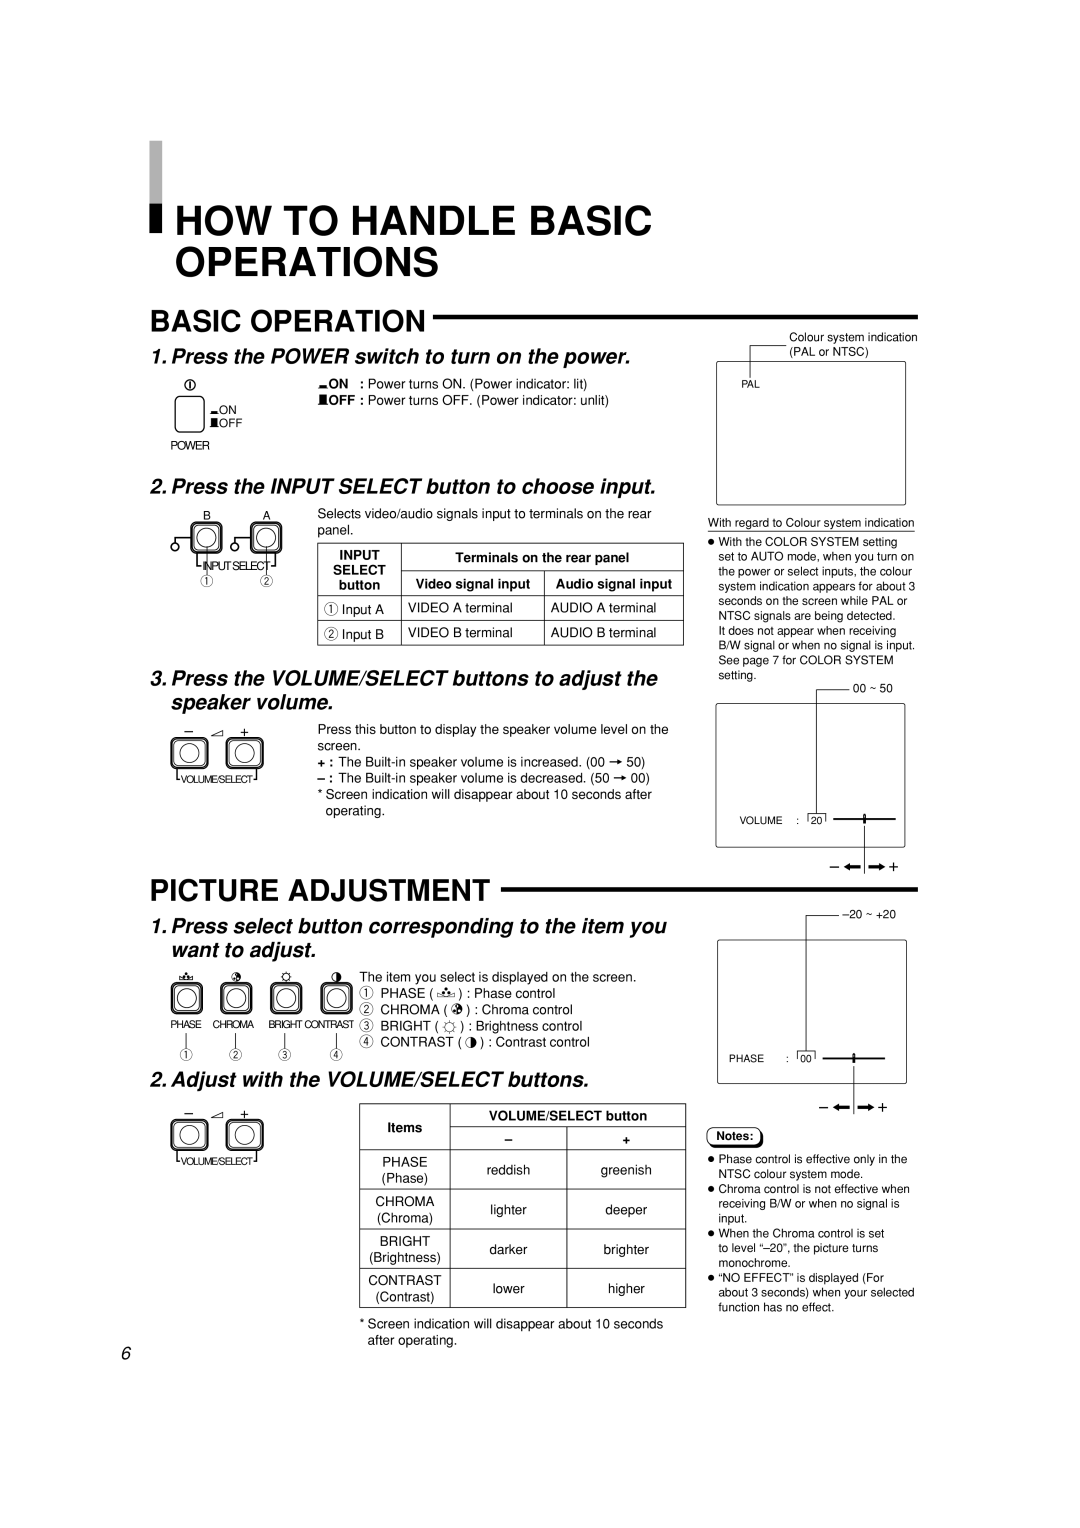 JVC LCT2141-001A-H manual How To Handle Basic Operations, Picture Adjustment, Press the POWER switch to turn on the power 